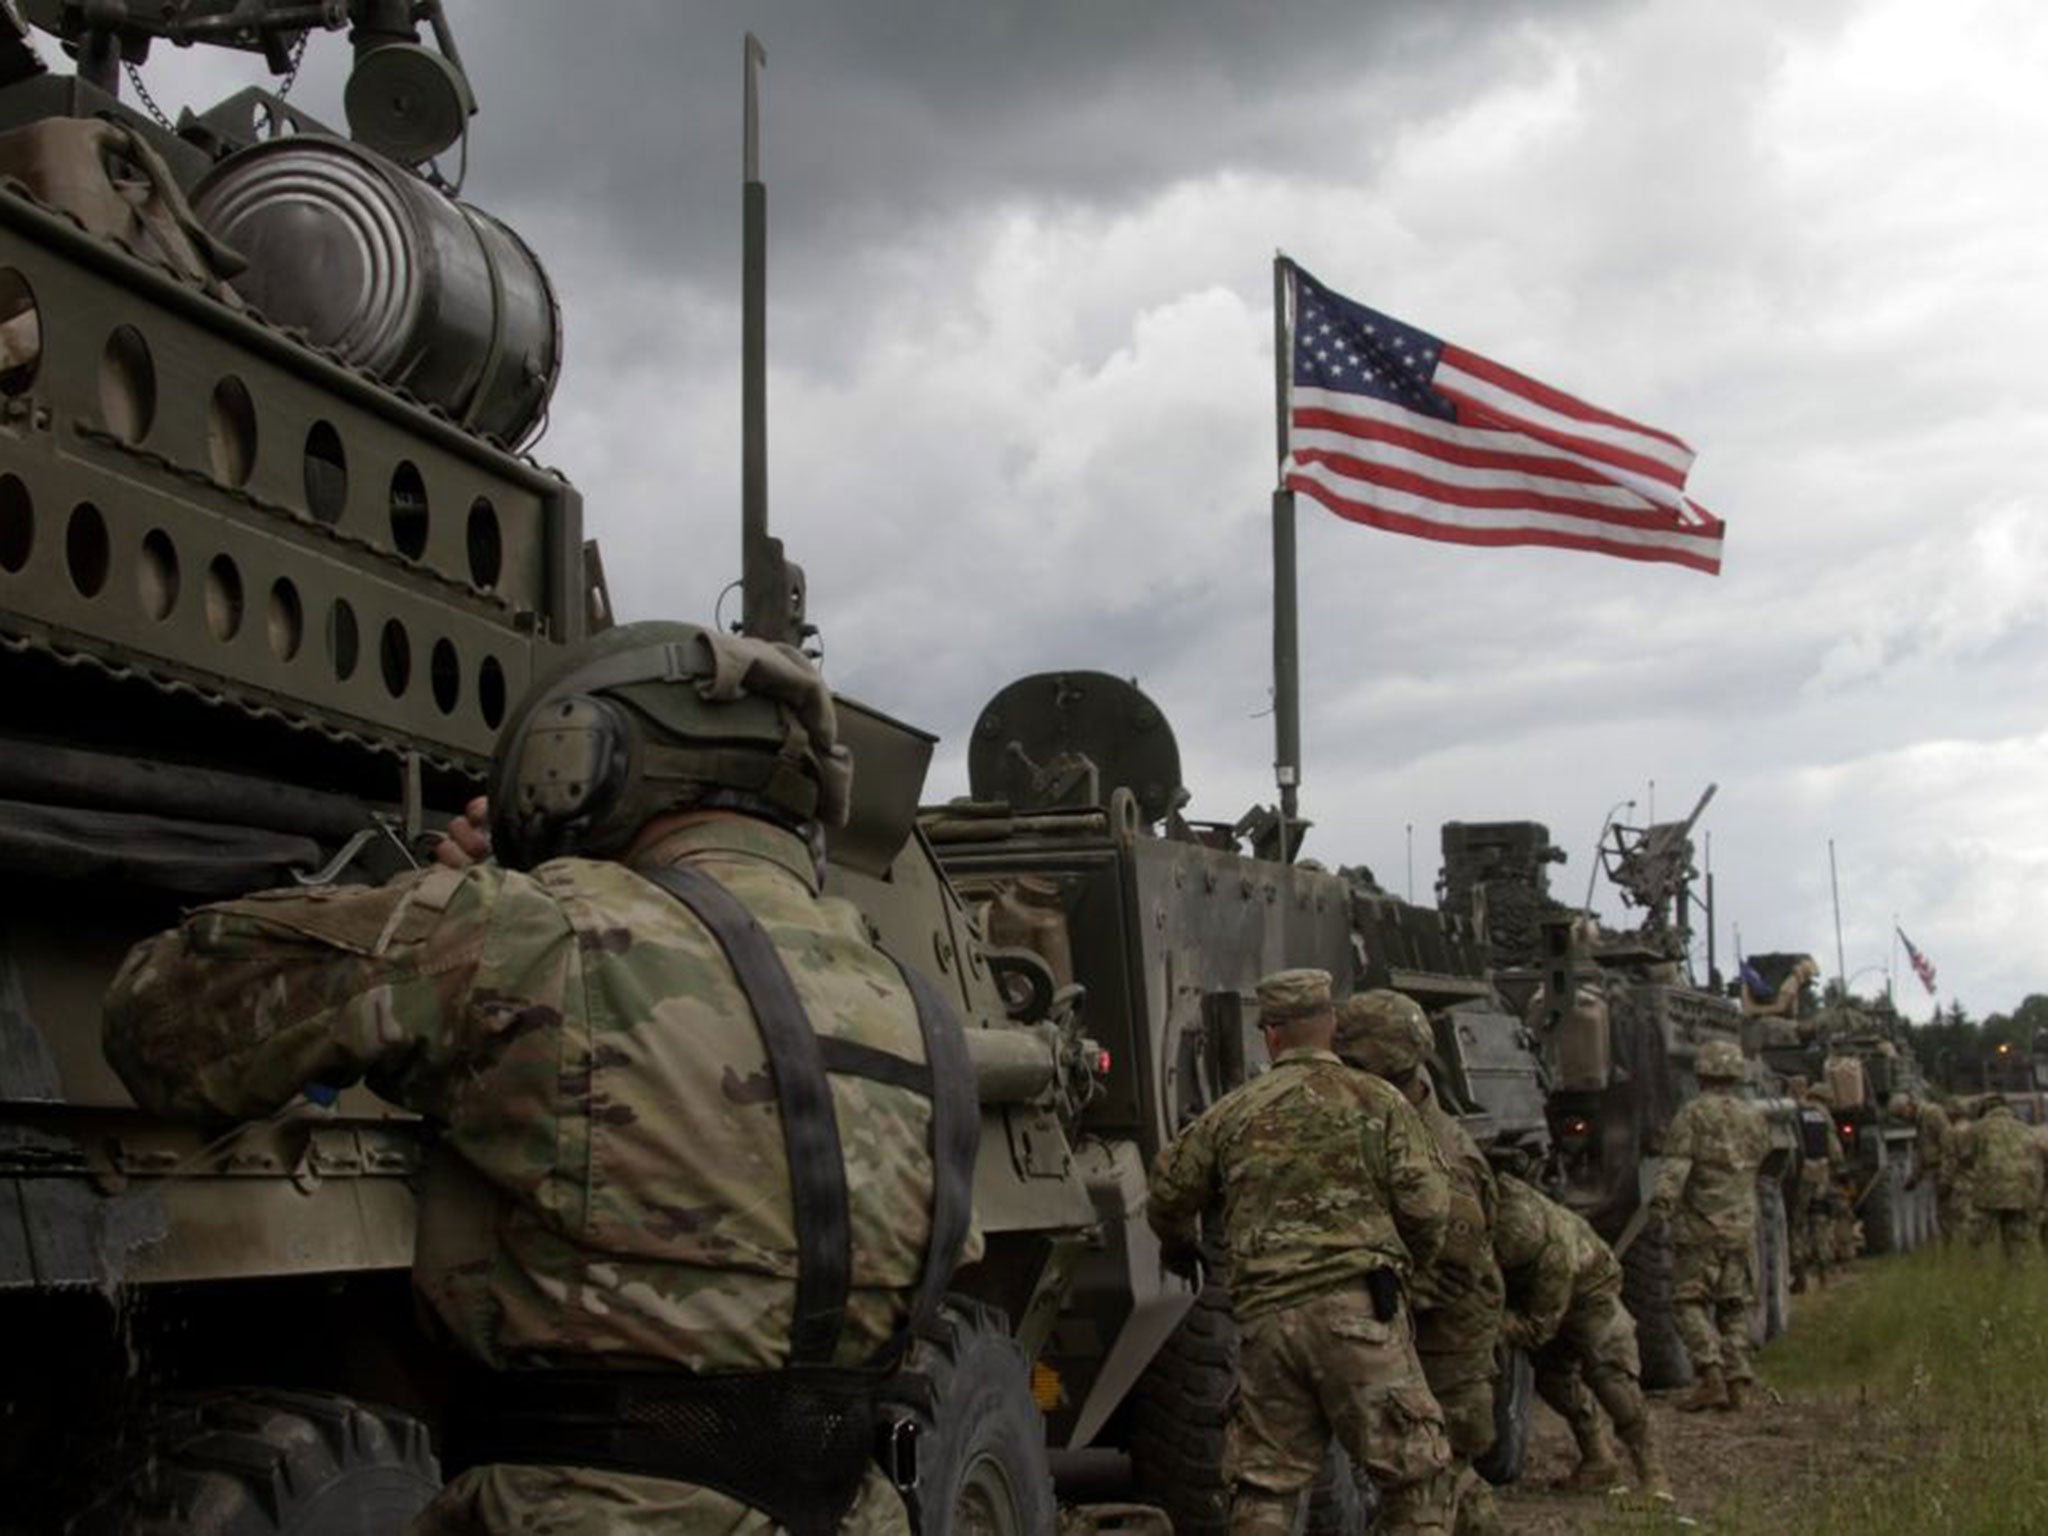 US soldiers en route to take part in the NATO exercises in Lithuania, Latvia and Estonia